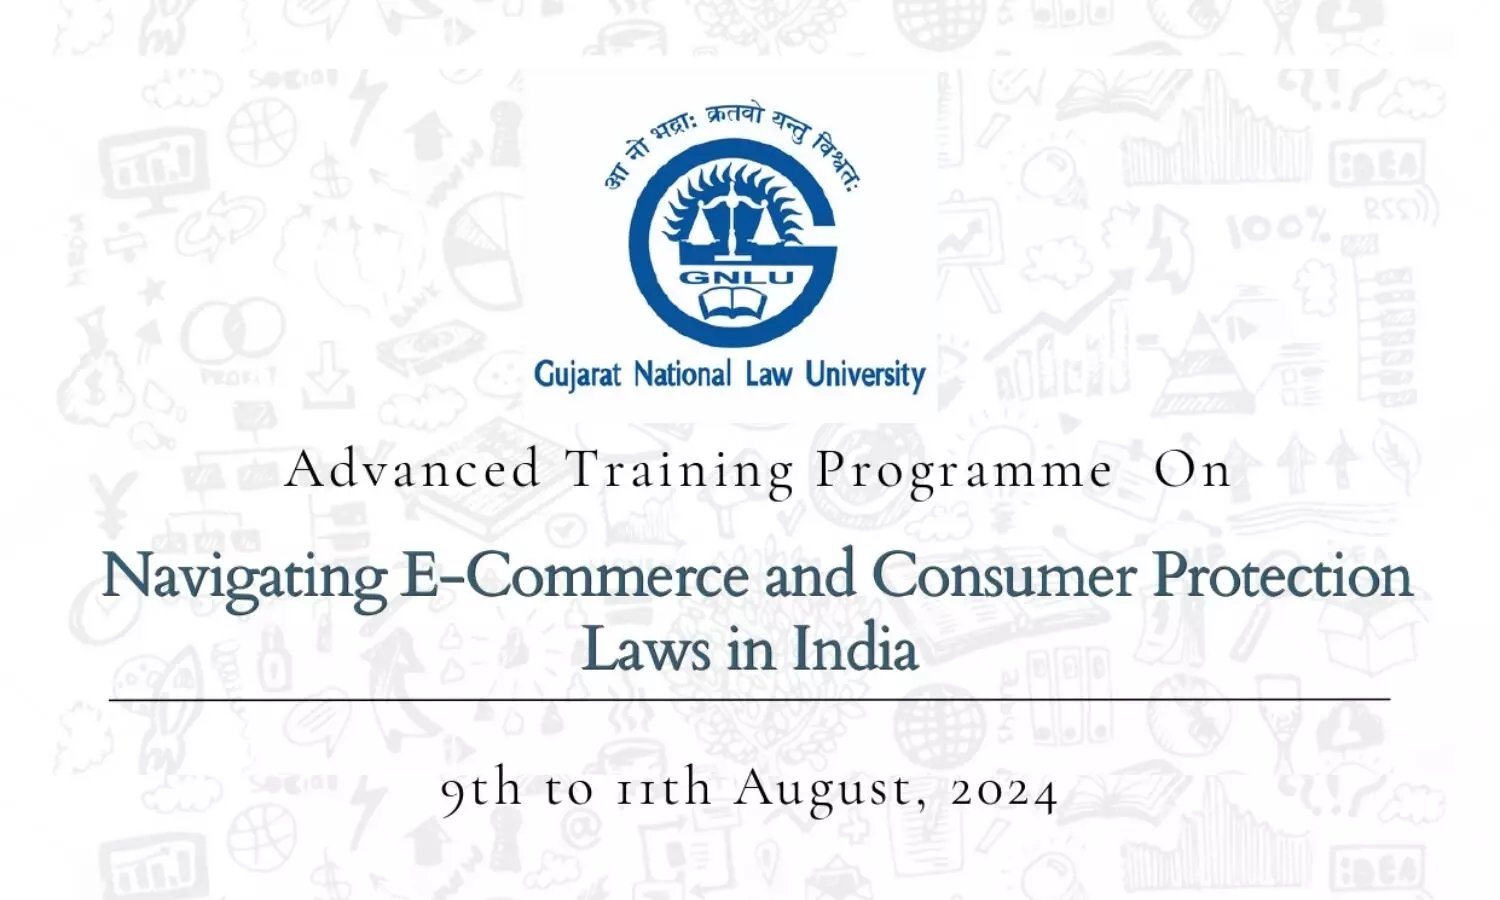 Advanced Training Programme on Navigating E-Commerce and Consumer Protection Laws in India  GNLU Gandhinagar